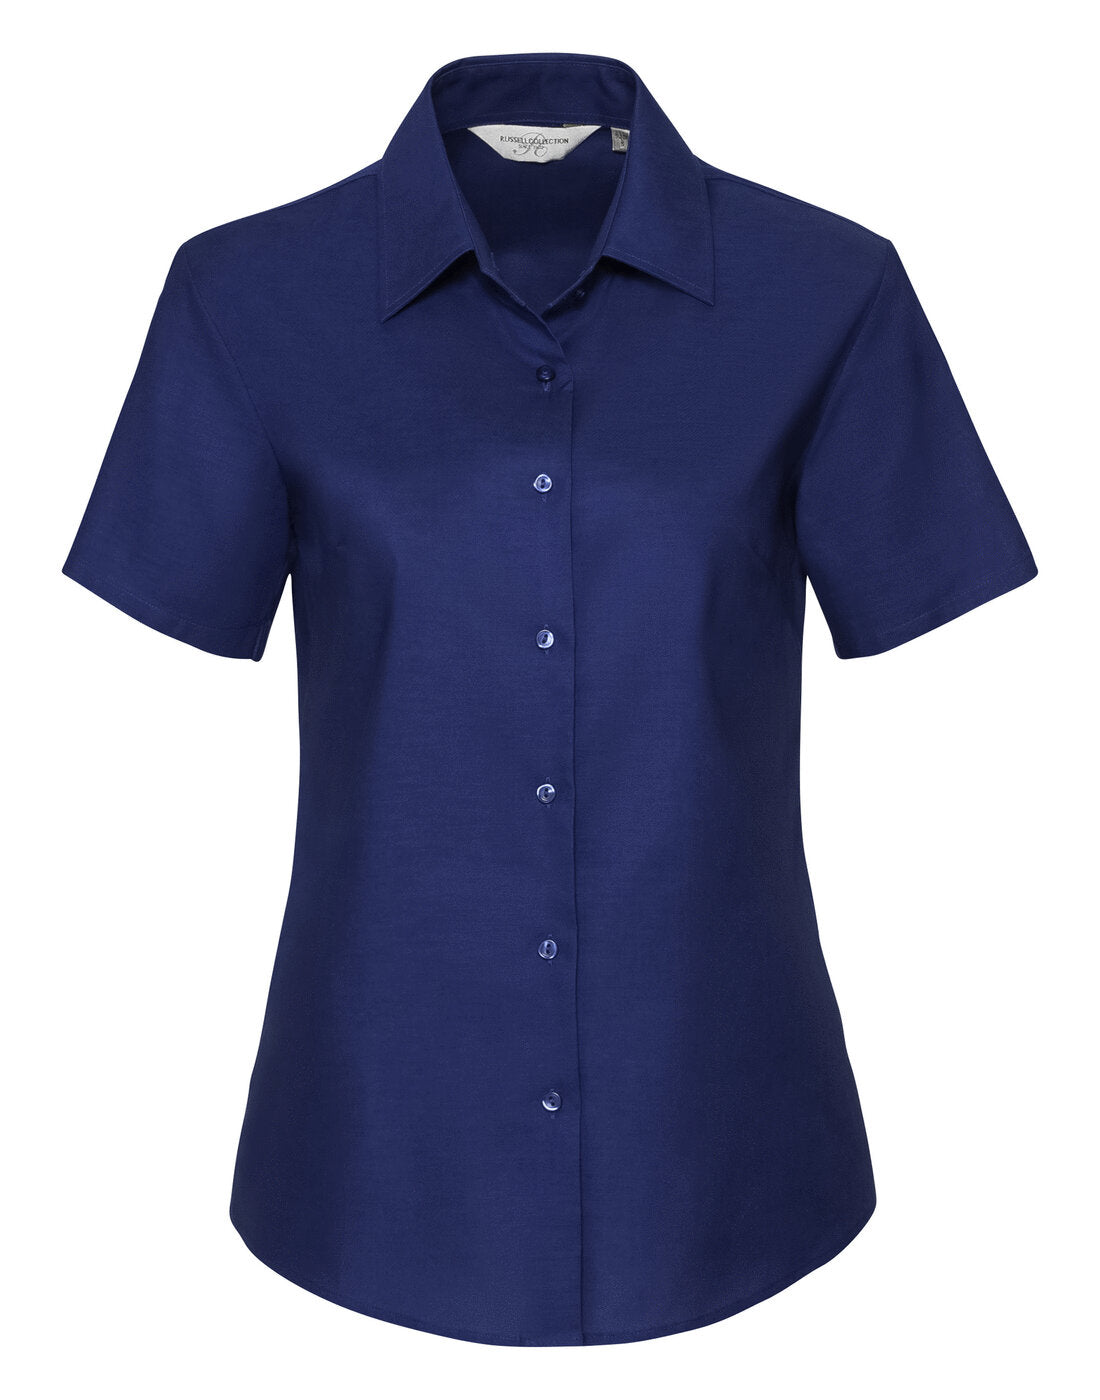 Russell Ladies Short Sleeve Tailored Oxford Shirt Bright Royal